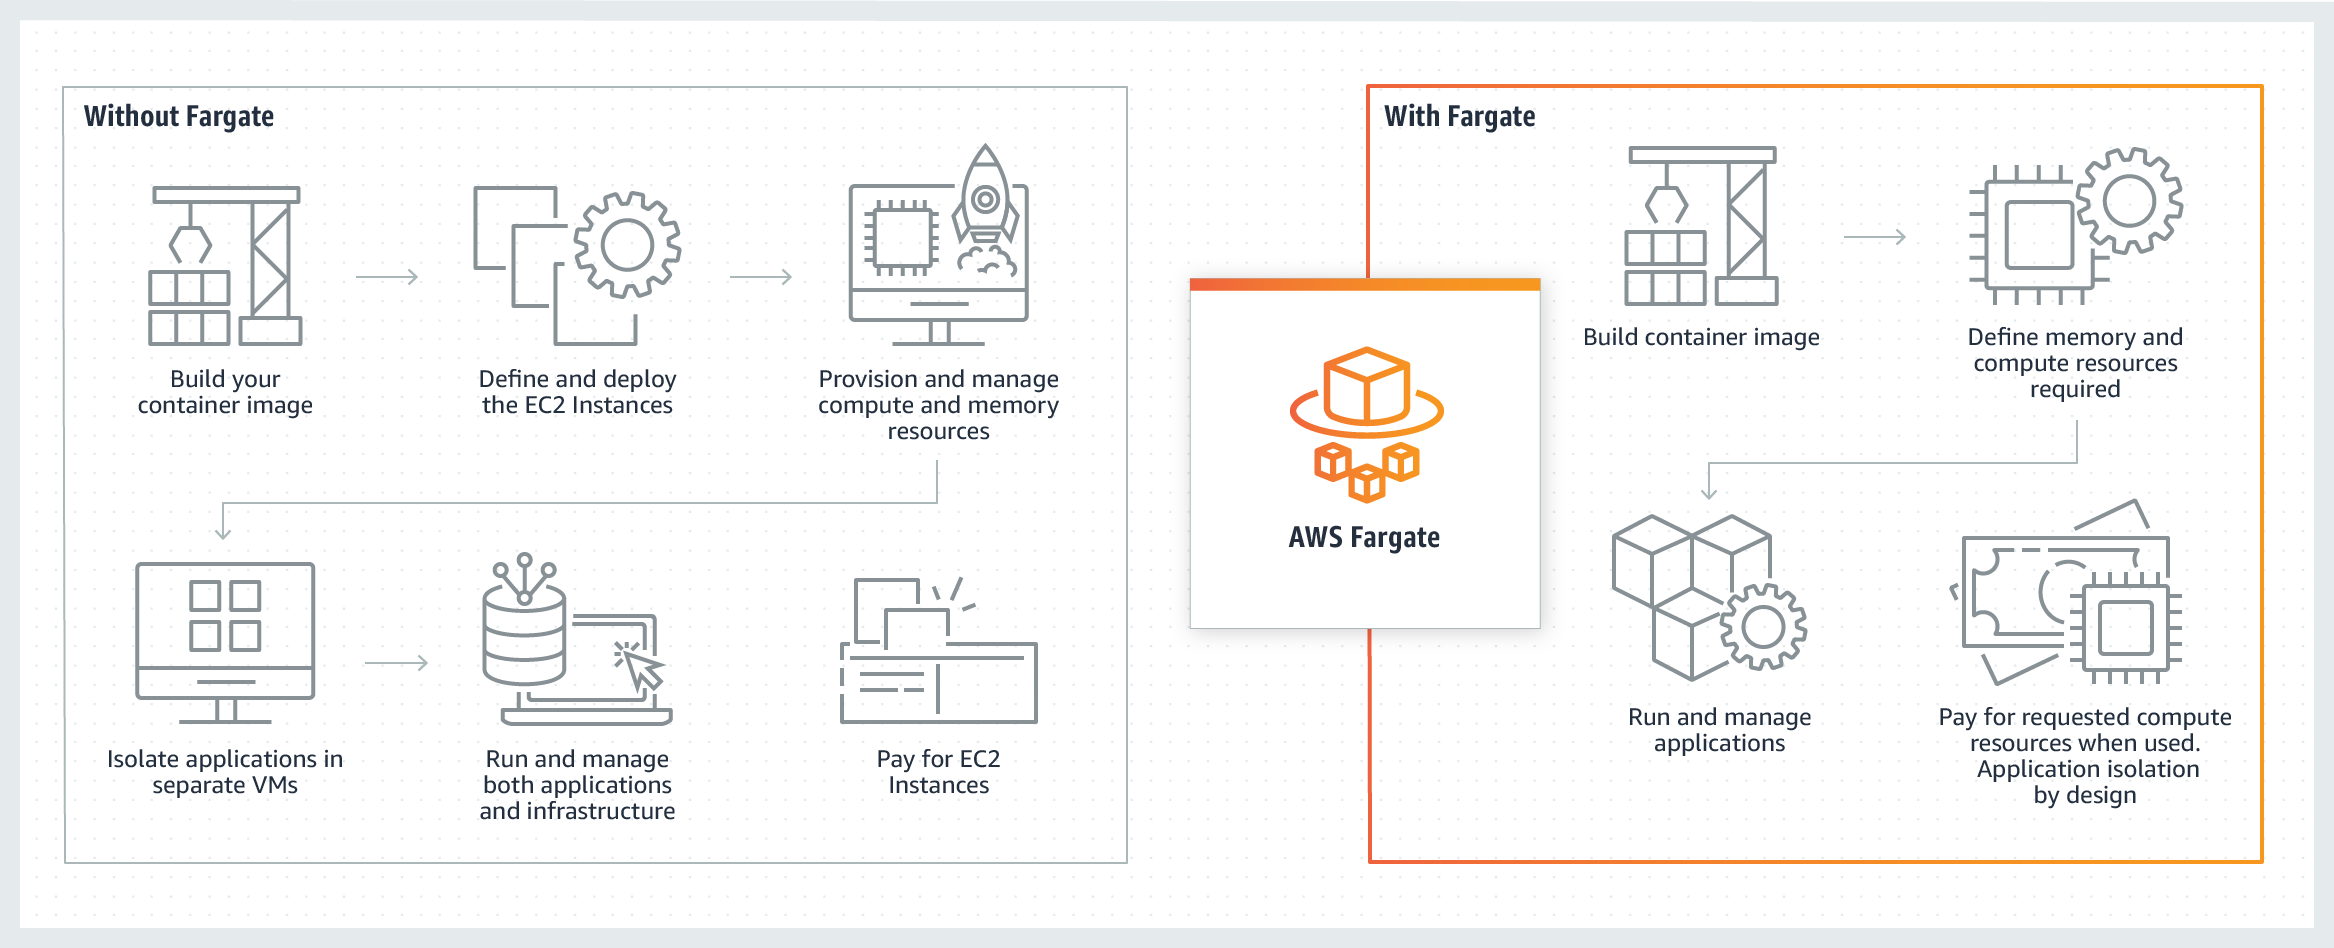 Image of AWS Fargate process diagram, showing how serverless functions in the AWS cloud.